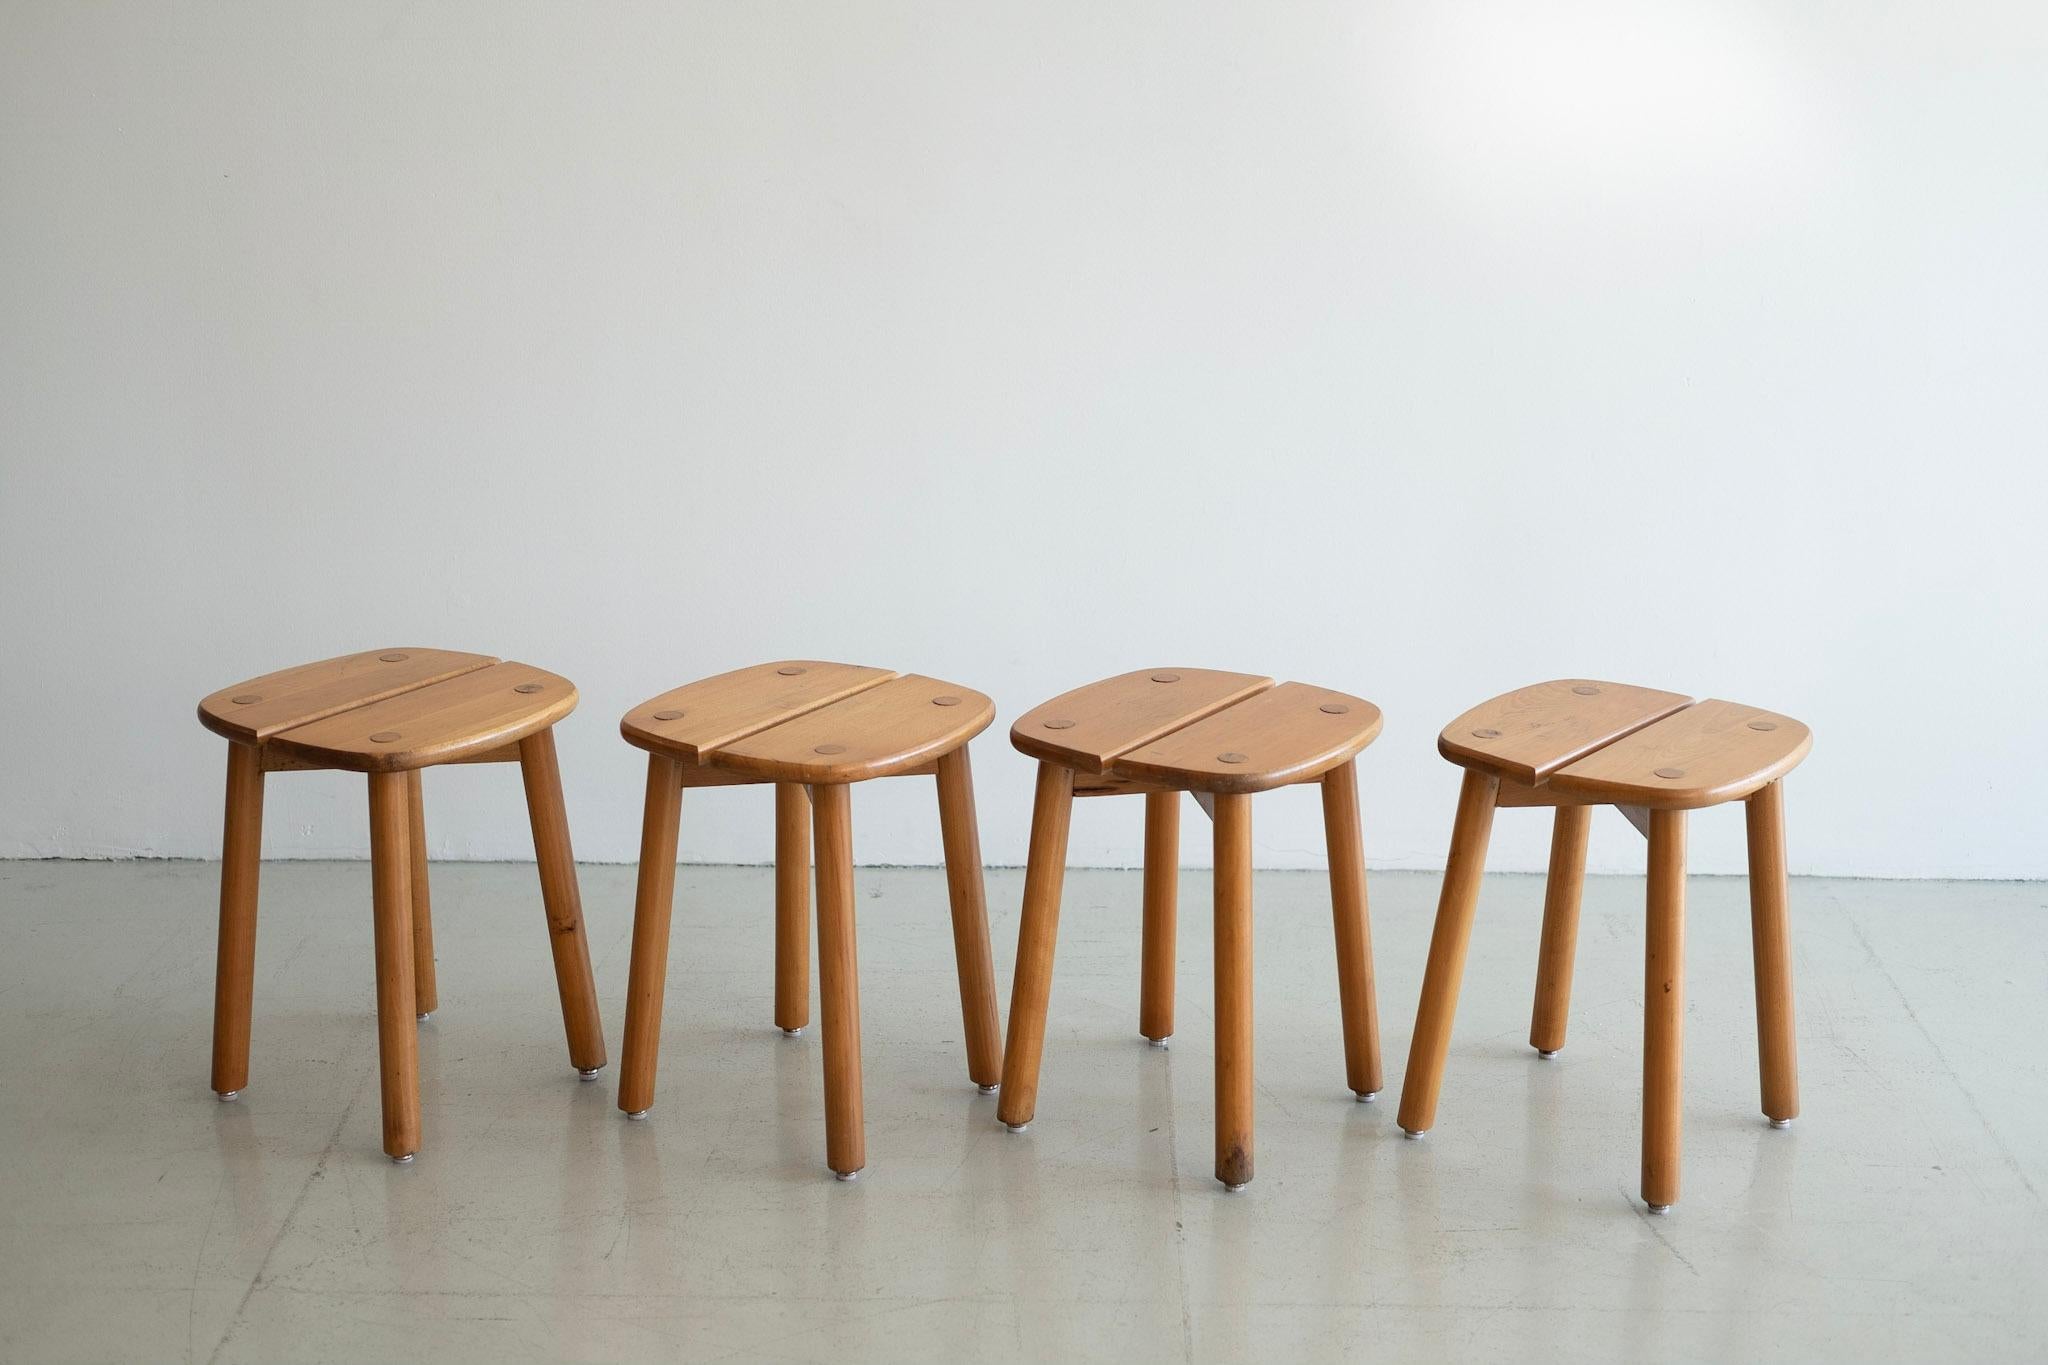 Fantastic wood stools by Pierre Gautier-buffet
Wonderful shape and patina.
3 available - priced individually. 